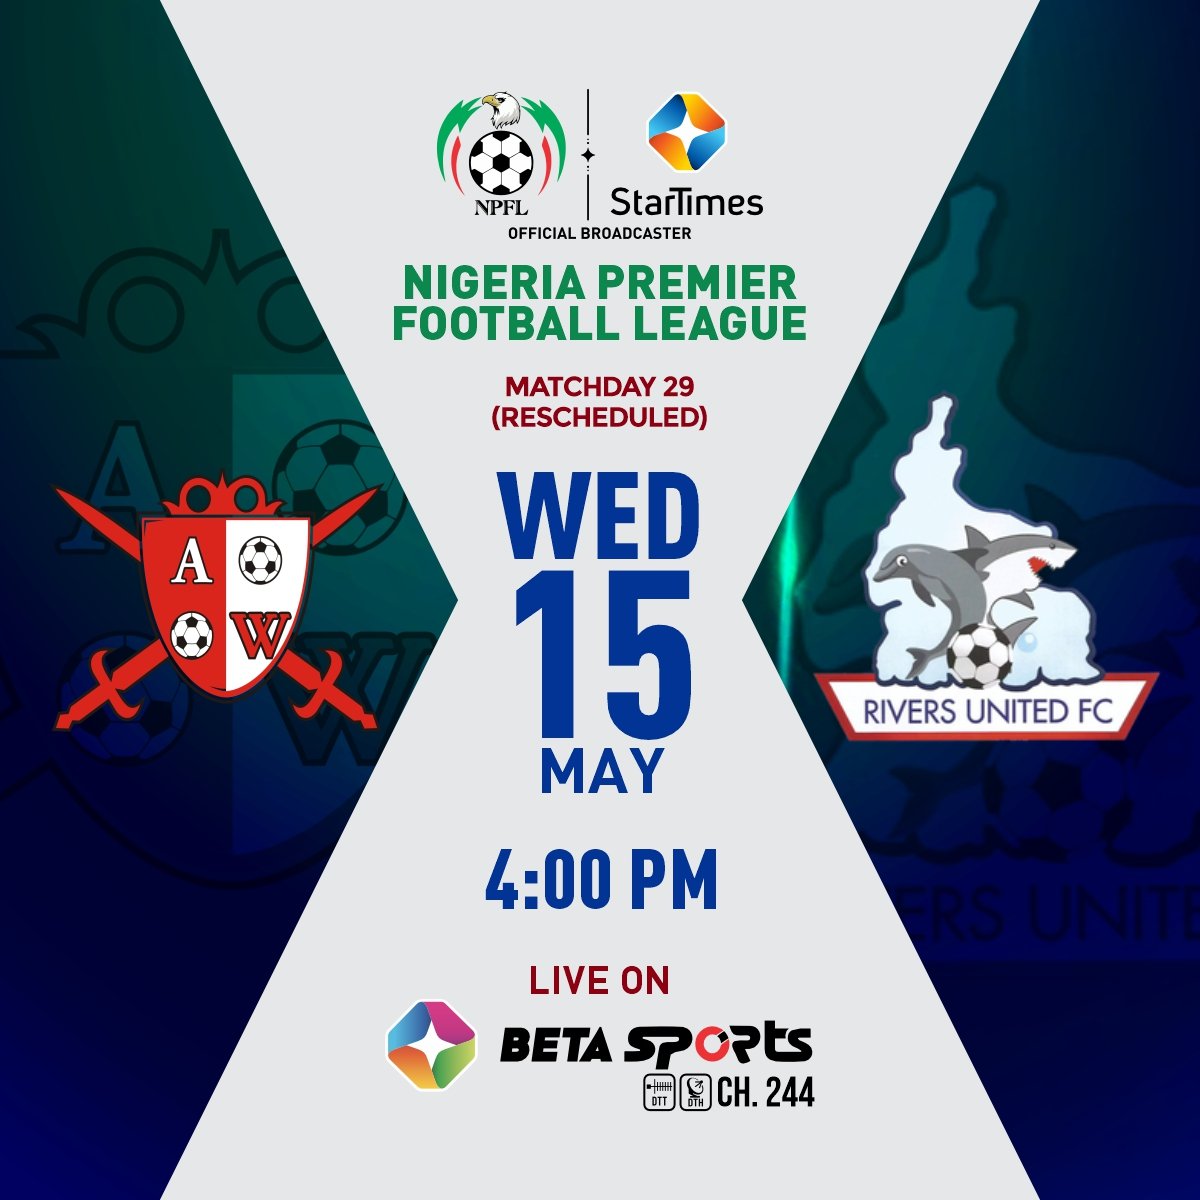 NEXT ▶️ We will face Abia Warriors in a rescheduled NPFL match on Wednesday, May 15 at 4pm. 🏟️ Umuahia Township Stadium 📺 Catch all the action on Beta Sports Channel 244 and get ready for the best of Naija Football. #NPFL24 || #MD29 || #ABIRIV